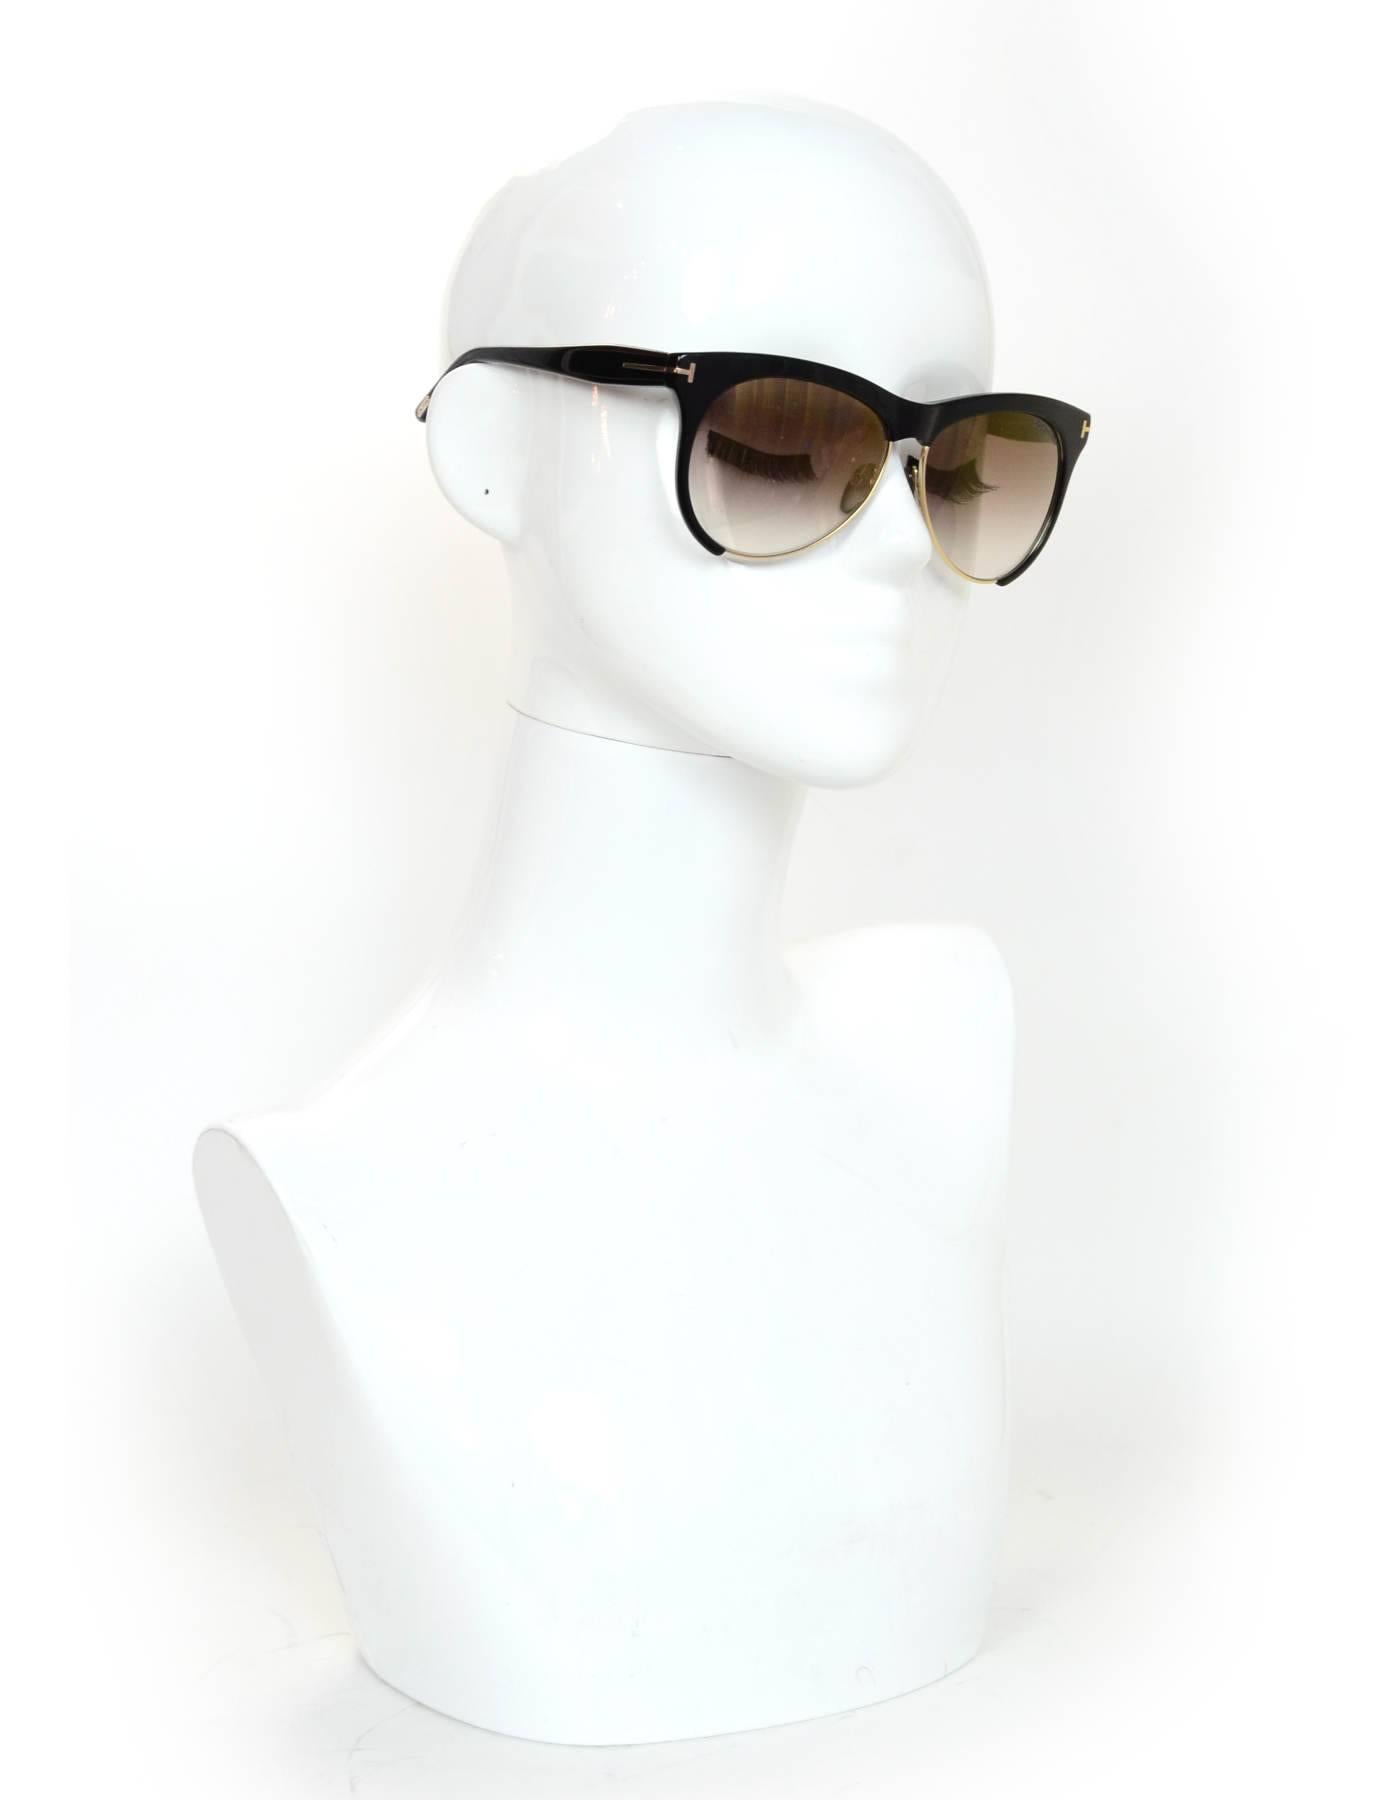 Tom Ford Black Leona Sunglasses 

Made In: Italy
Color: Black
Materials: Resin, metal
Overall Condition: Excellent pre-owned condition with the exception of light surface marks
Includes: Tom Ford case

Measurements:
Length Across: 5.5